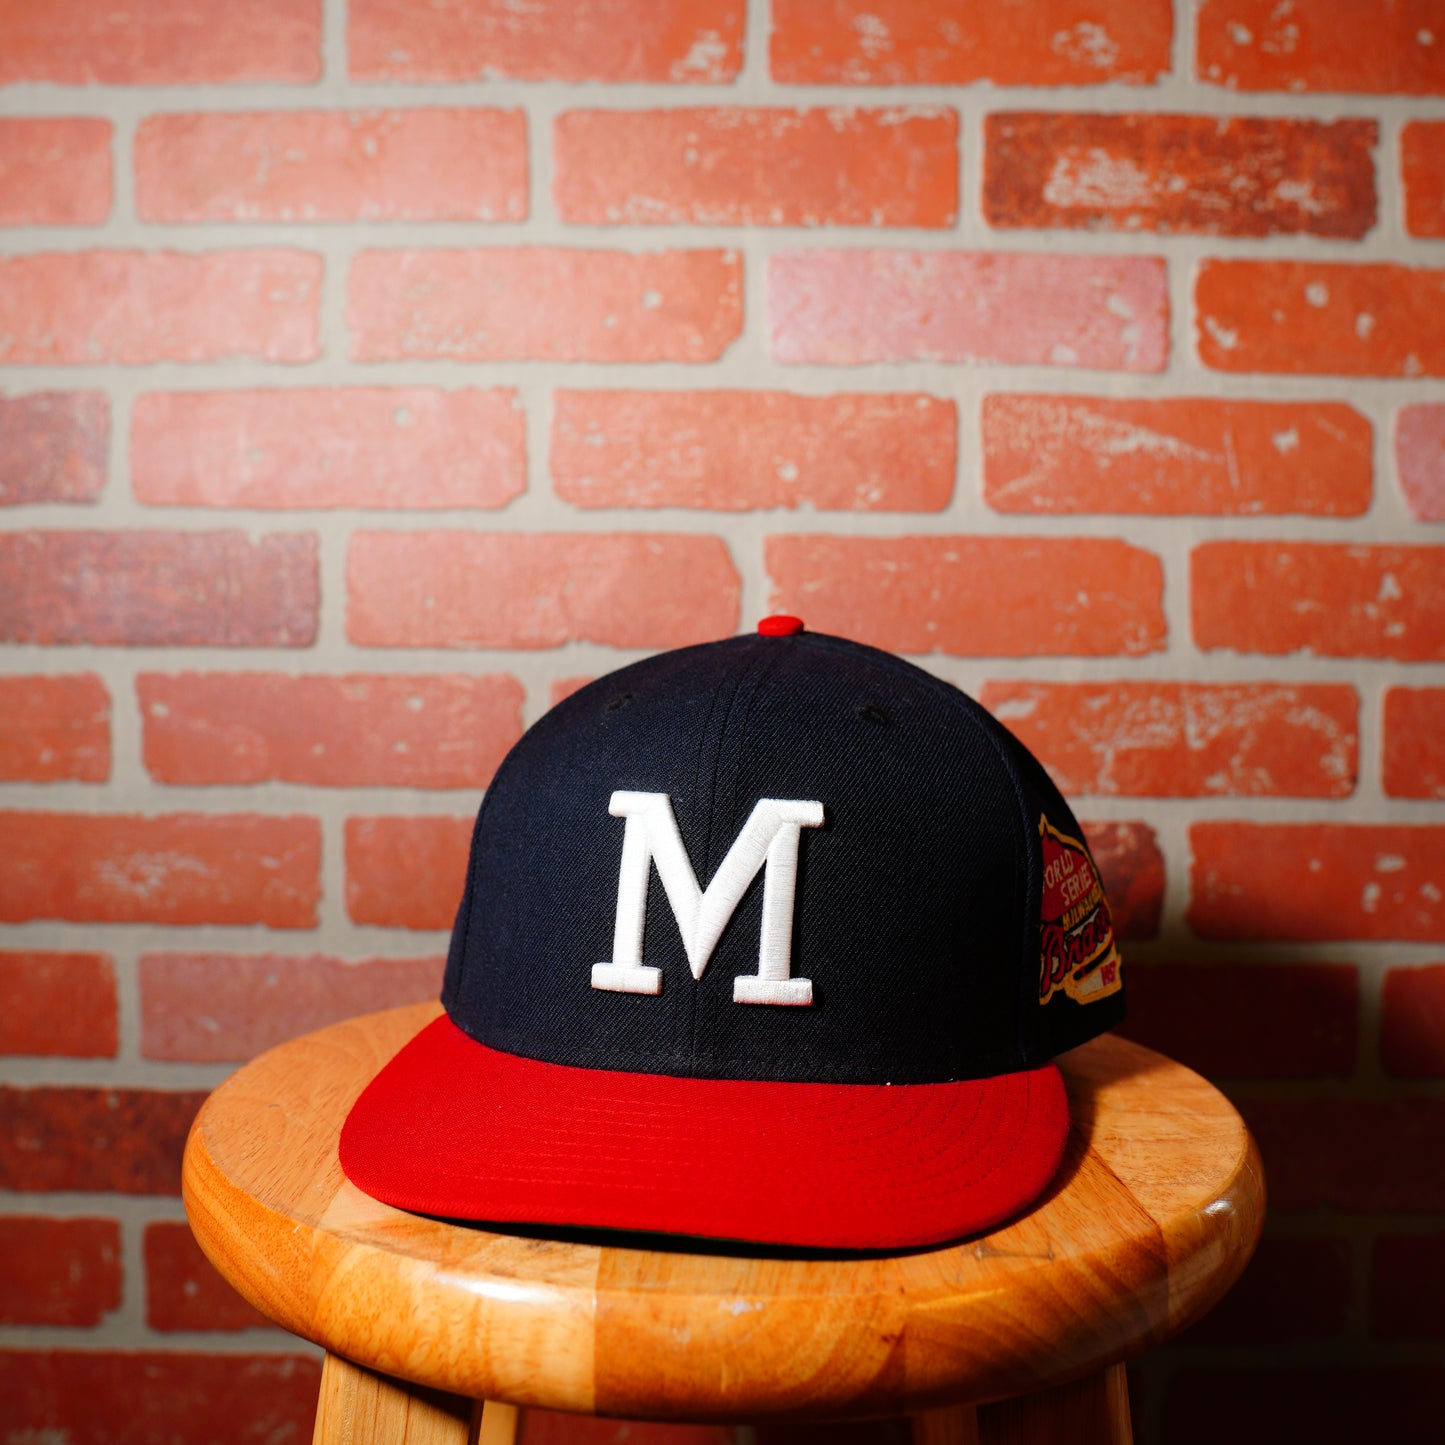 New Era Milwaukee Braves Fitted Hat